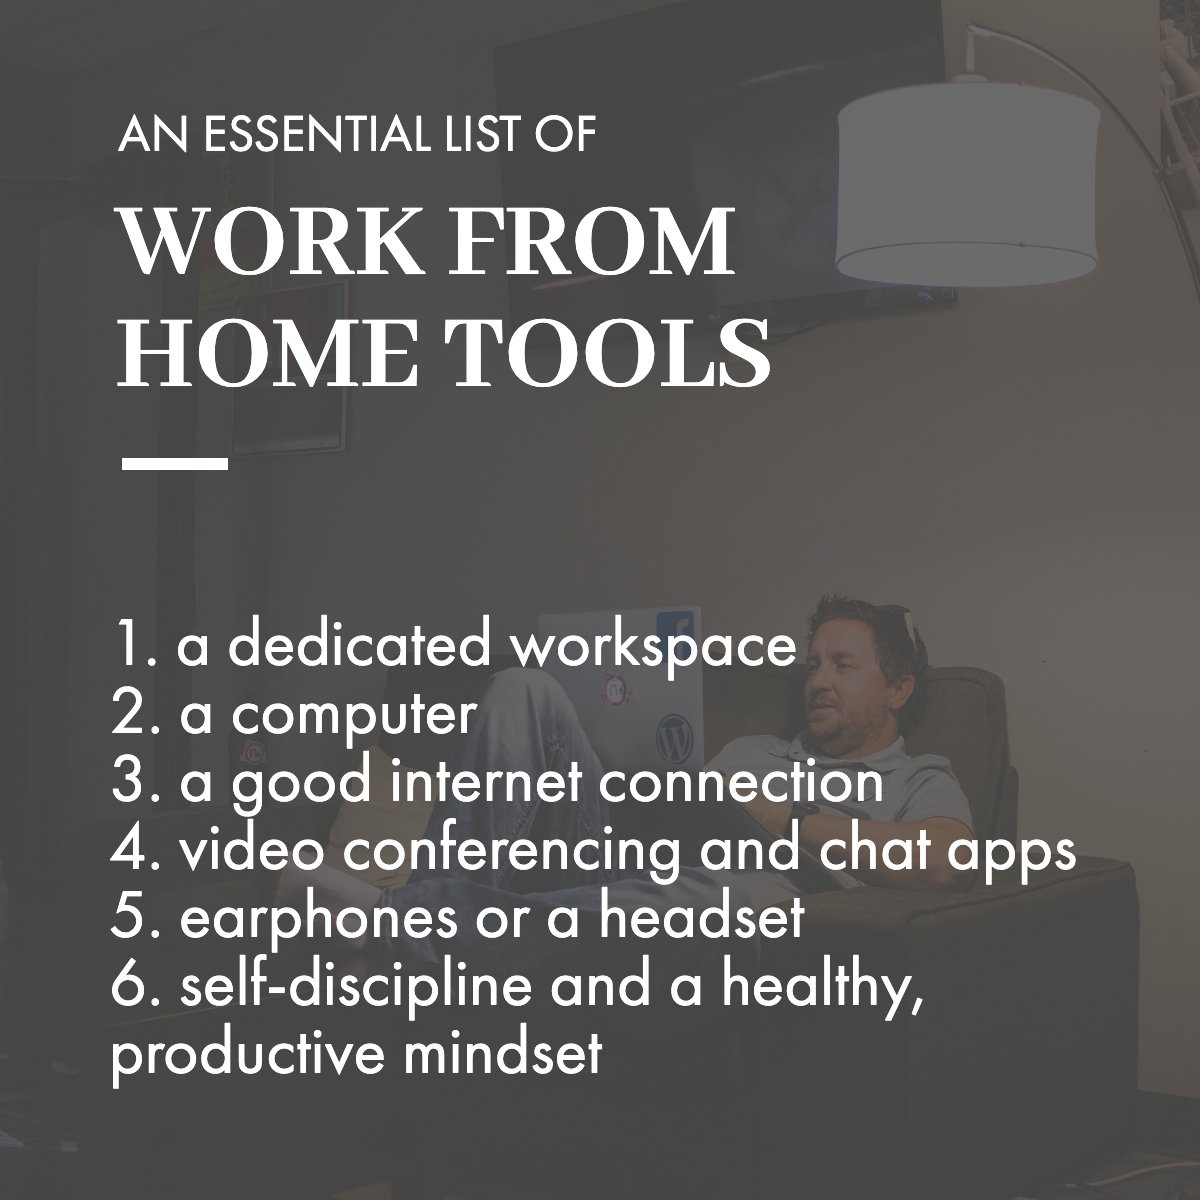 Check the list for essentials to work from home 💻

#workfromhome #workathome #homelifestyle #homestudio #remotelife
 #realestatemarket #realtor #realestateagent #marketexpert #realestate #homeowner #house #houseexpert #home #homesearch #desmoines #altoona #homes